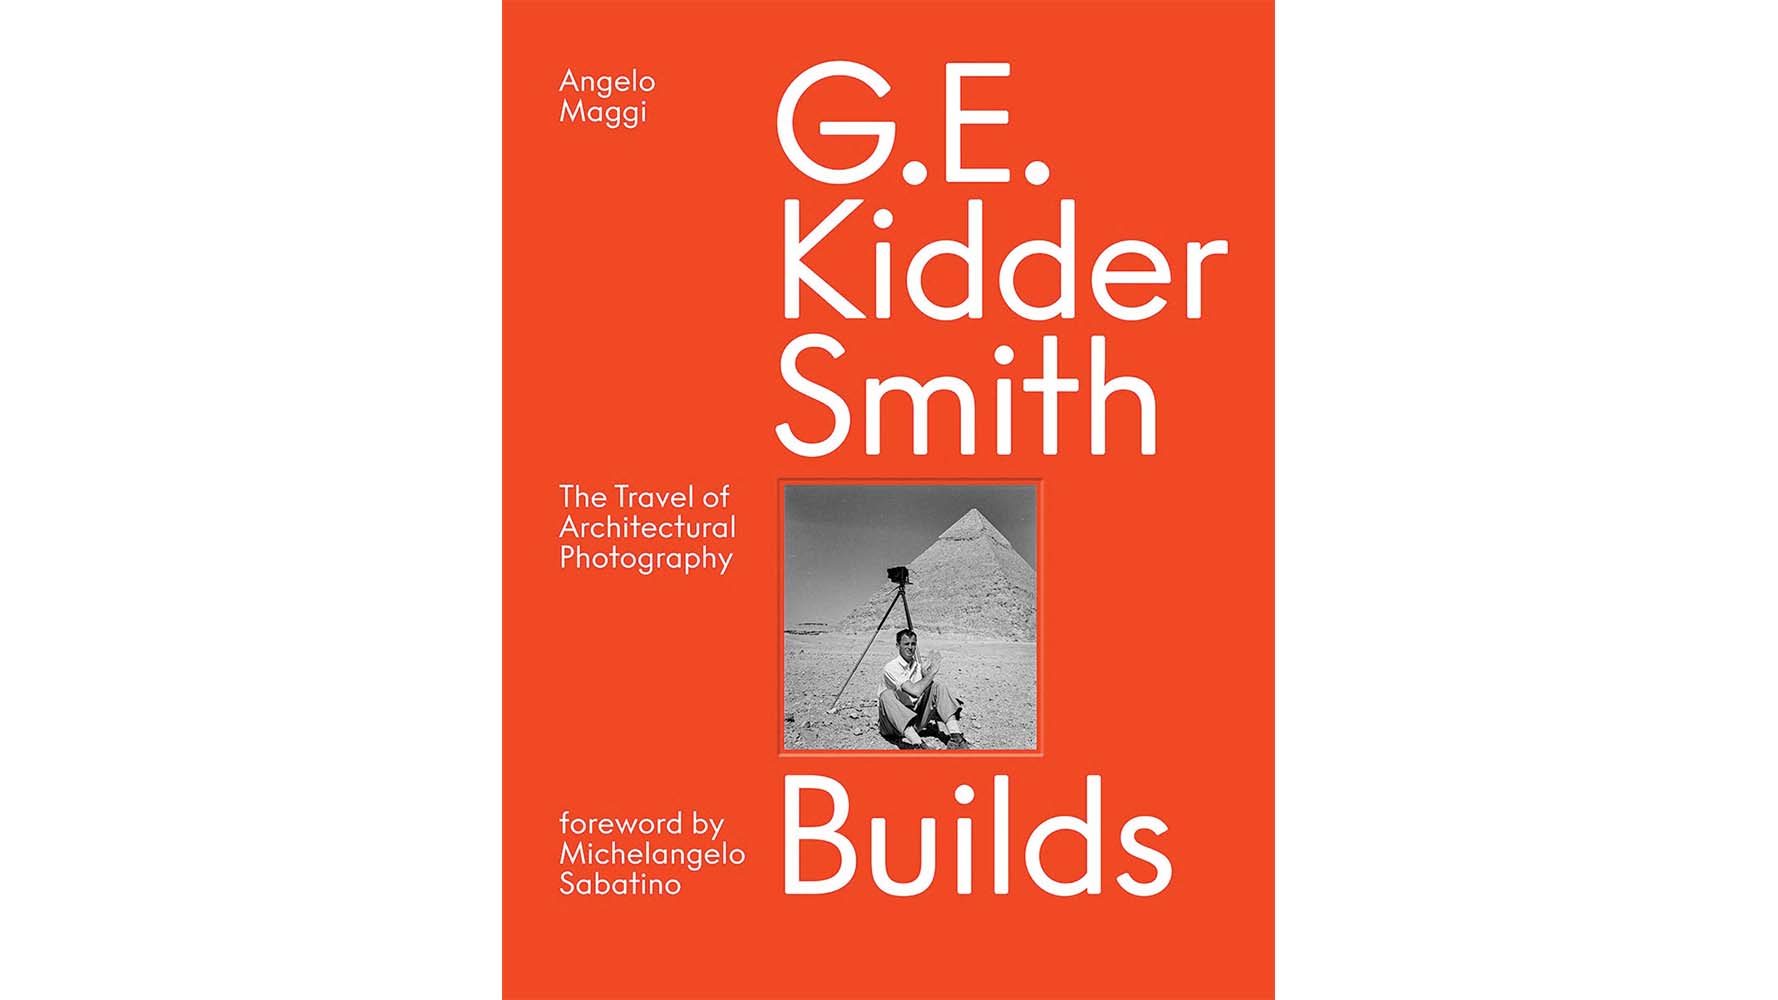 G.E. Kidder Smith Builds: The Travel of Architectural Photography.